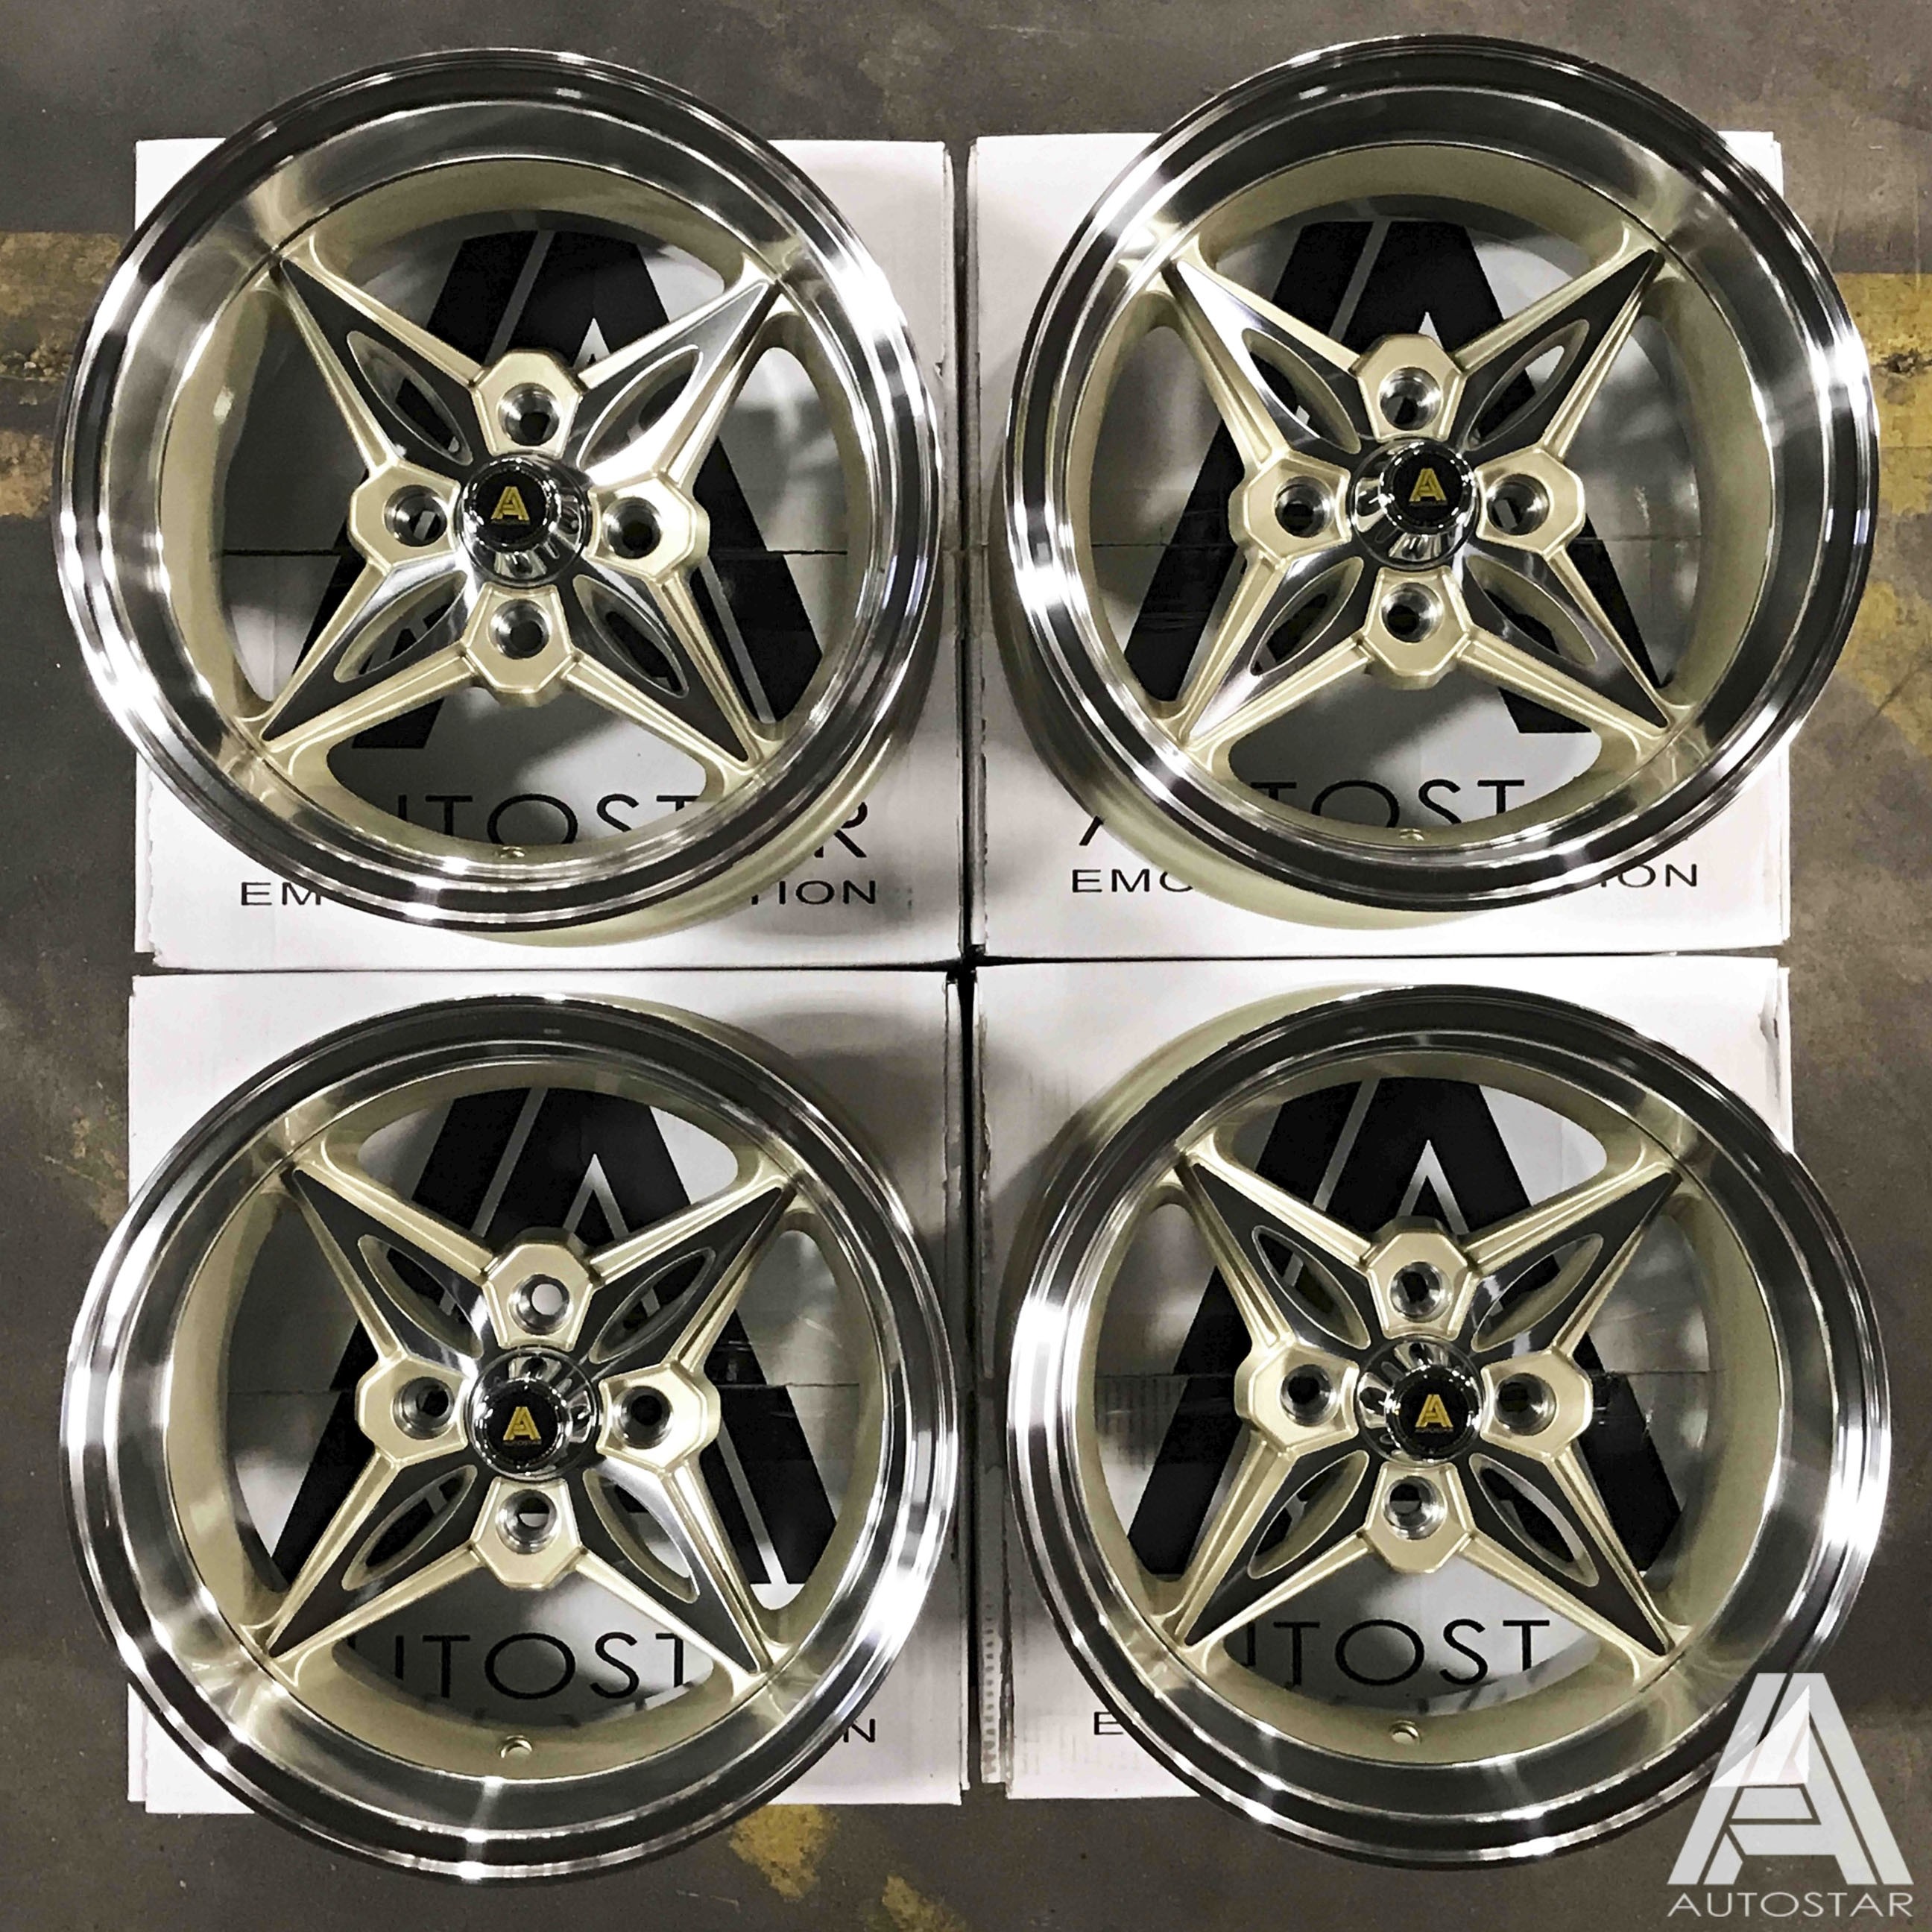 AutoStar Kanji 14x8.0 ET-5 & 14x9.0 ET-13 4x114 Polished Lip with Champagne Gold Centre - Staggered Set of 4